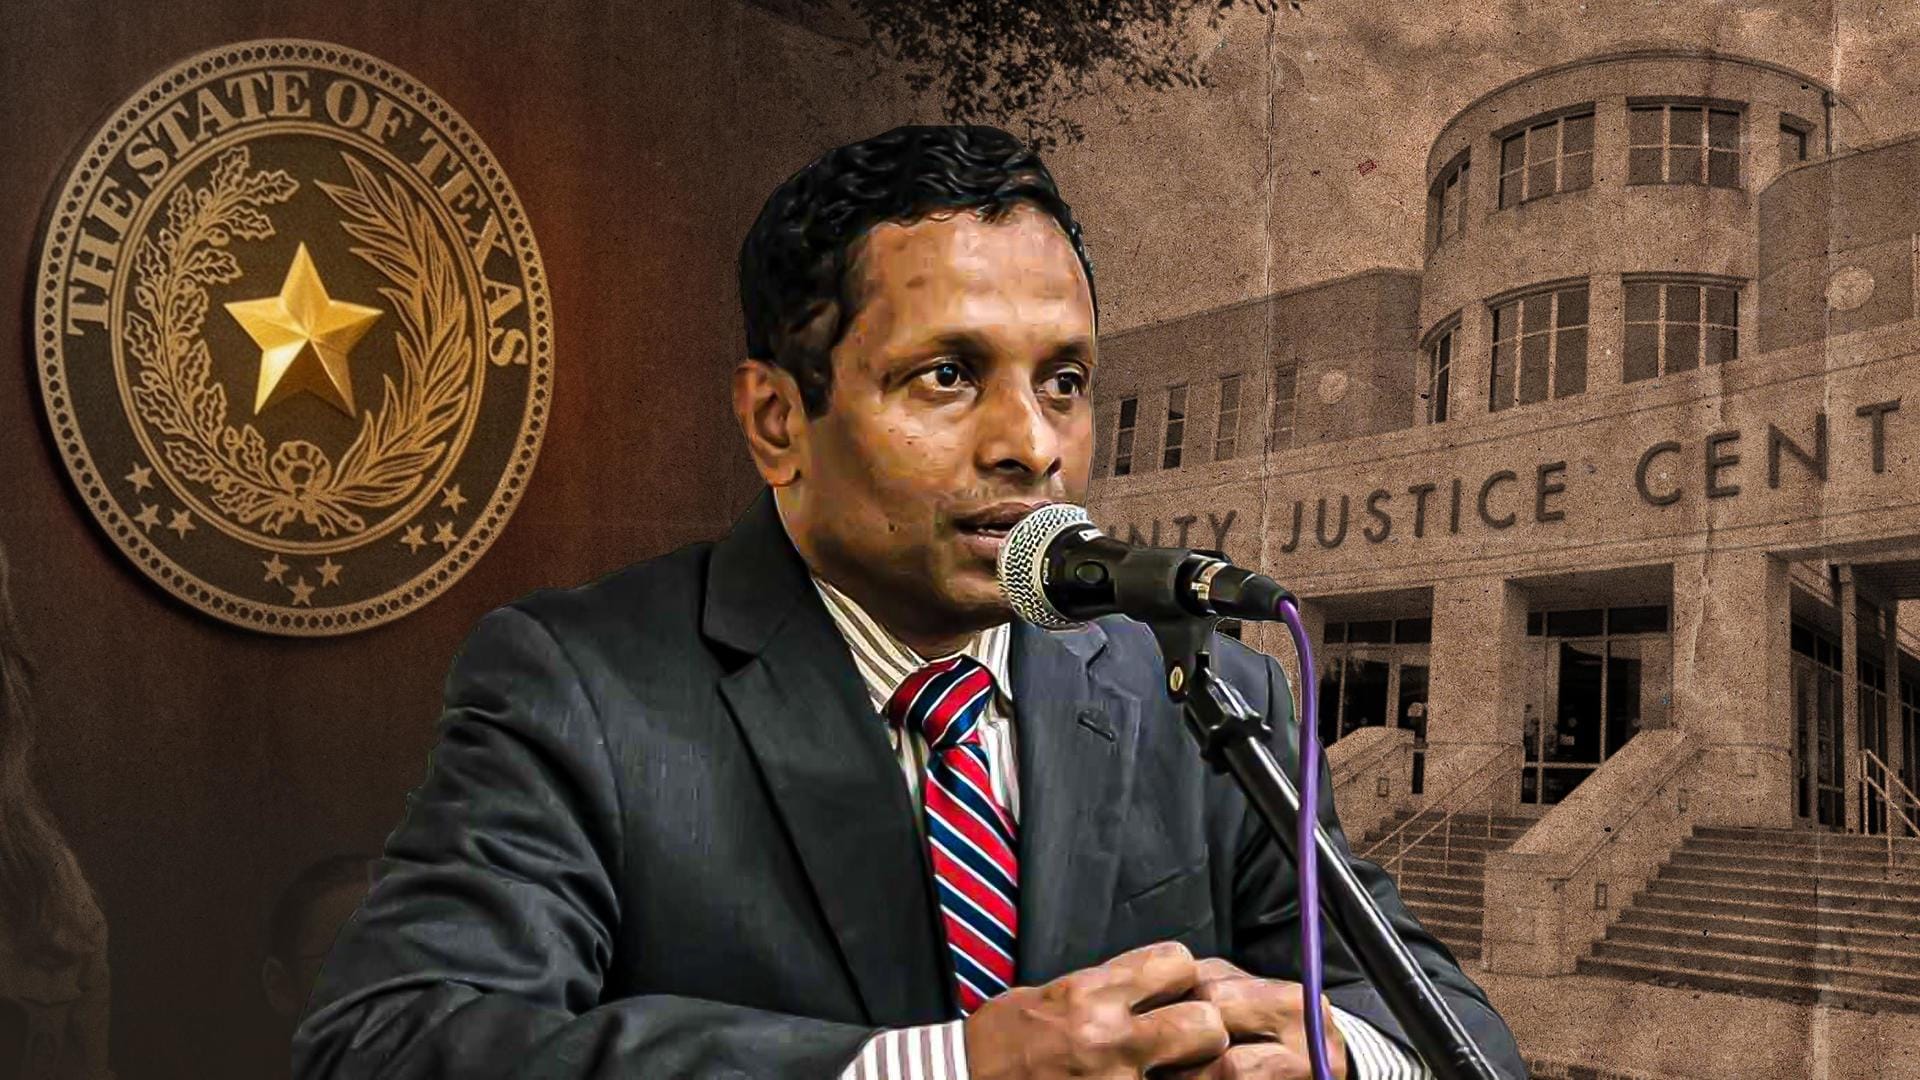 Surendran pattel who rolled beedis now Texas 240 district judge